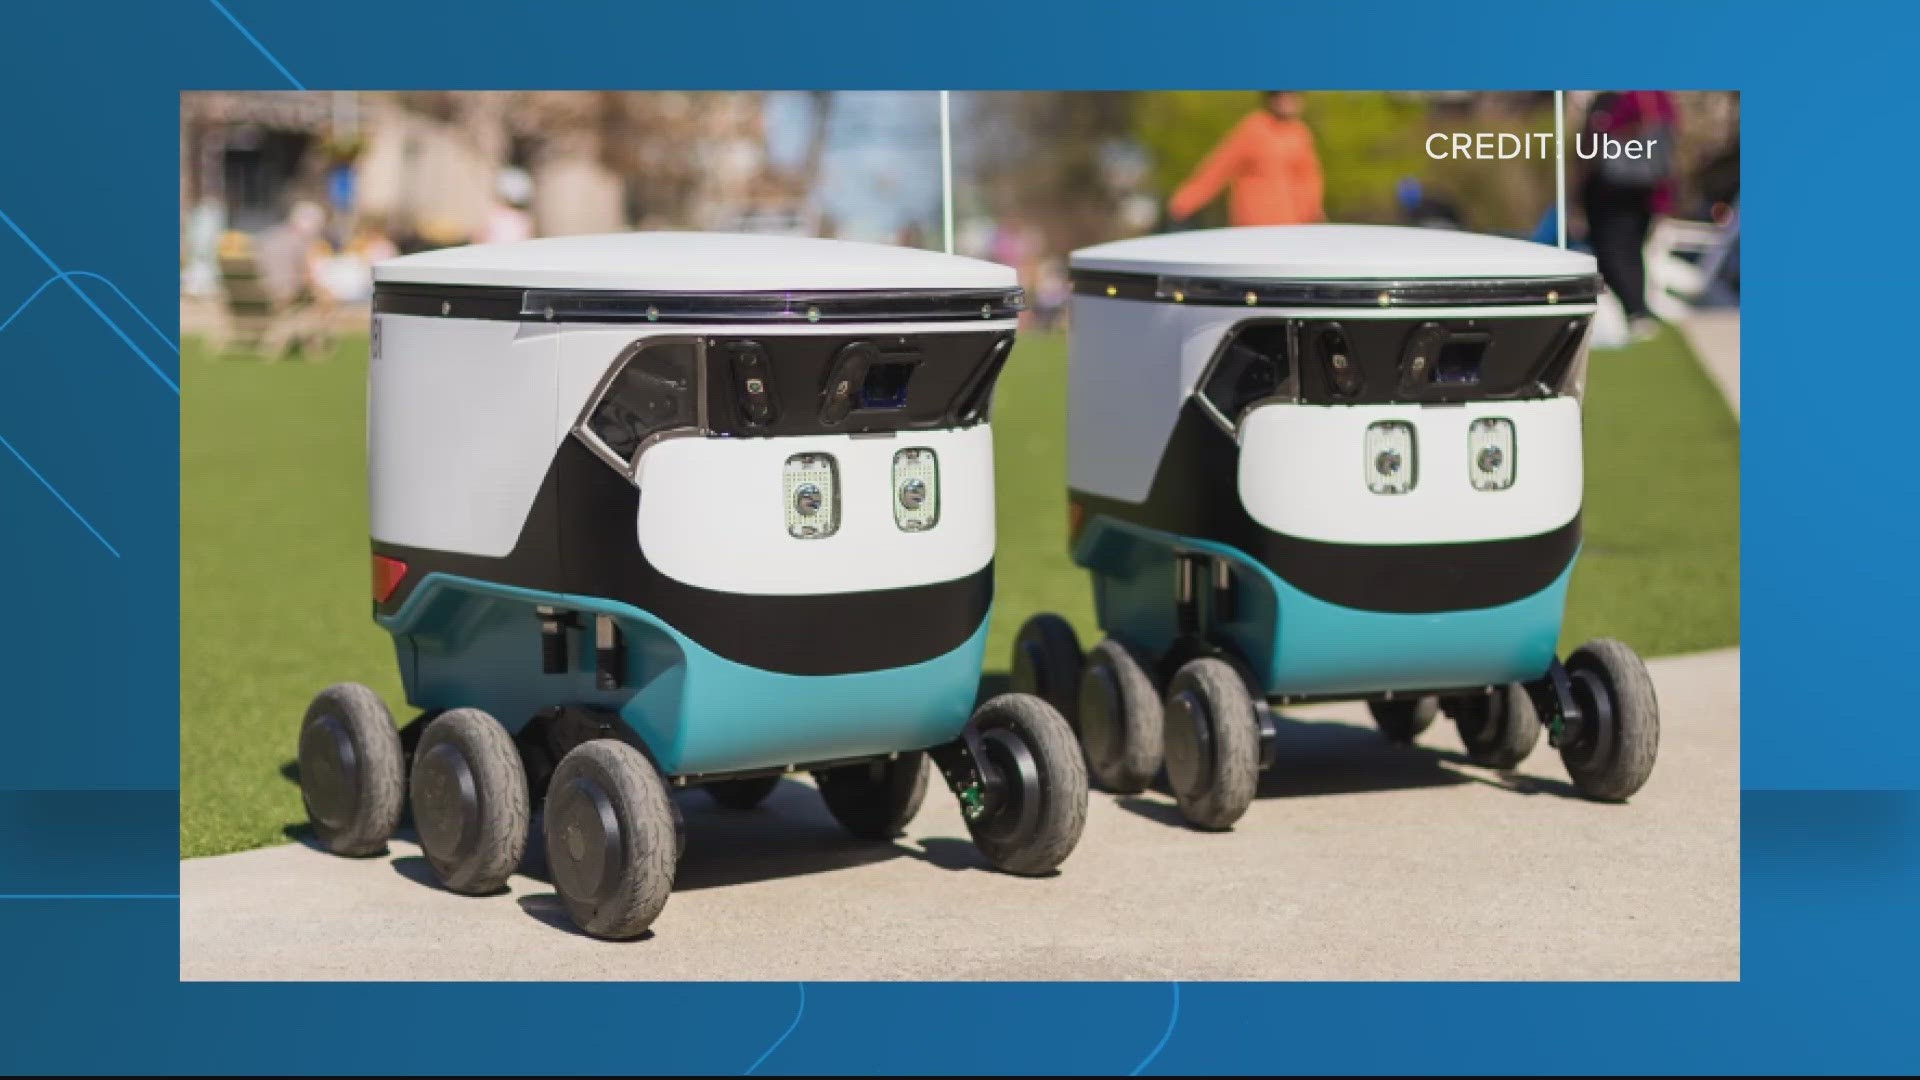 Good news for Virginia Uber Eats customers who want little human interaction, the third-party delivery platform is expanding its AI-powered robot delivery.